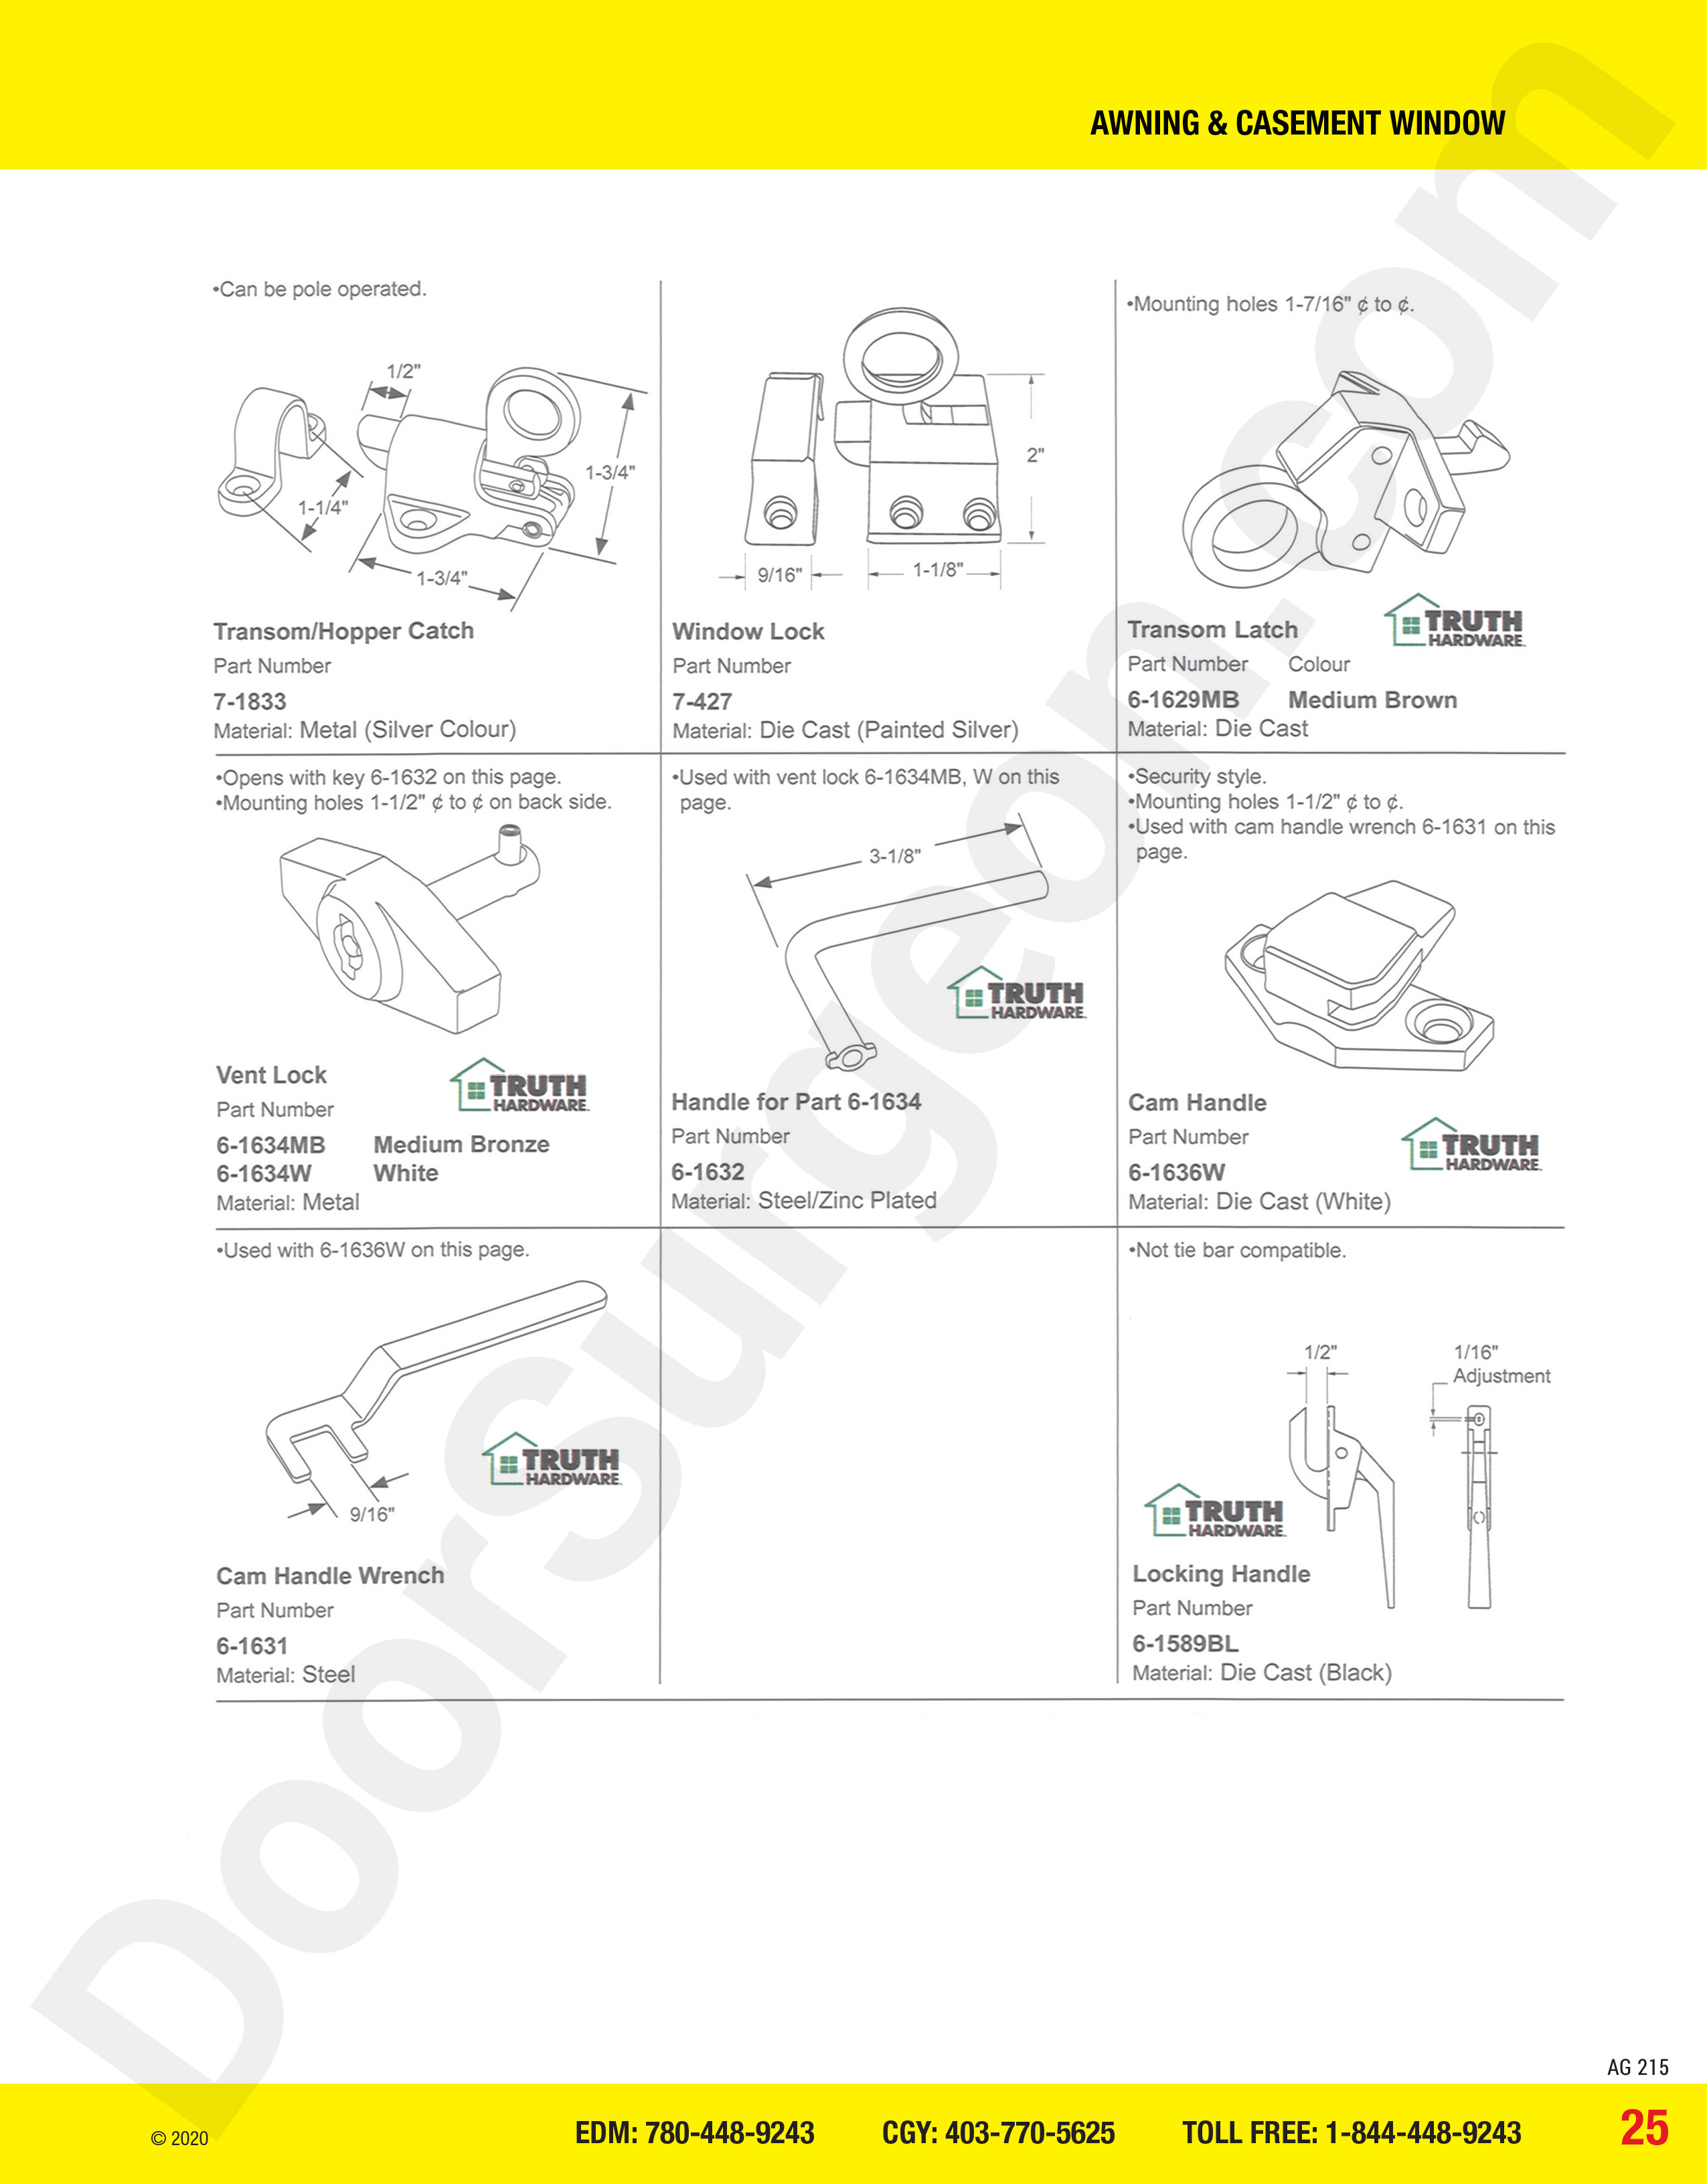 awning and casement window parts for catch, latch, lock and handle